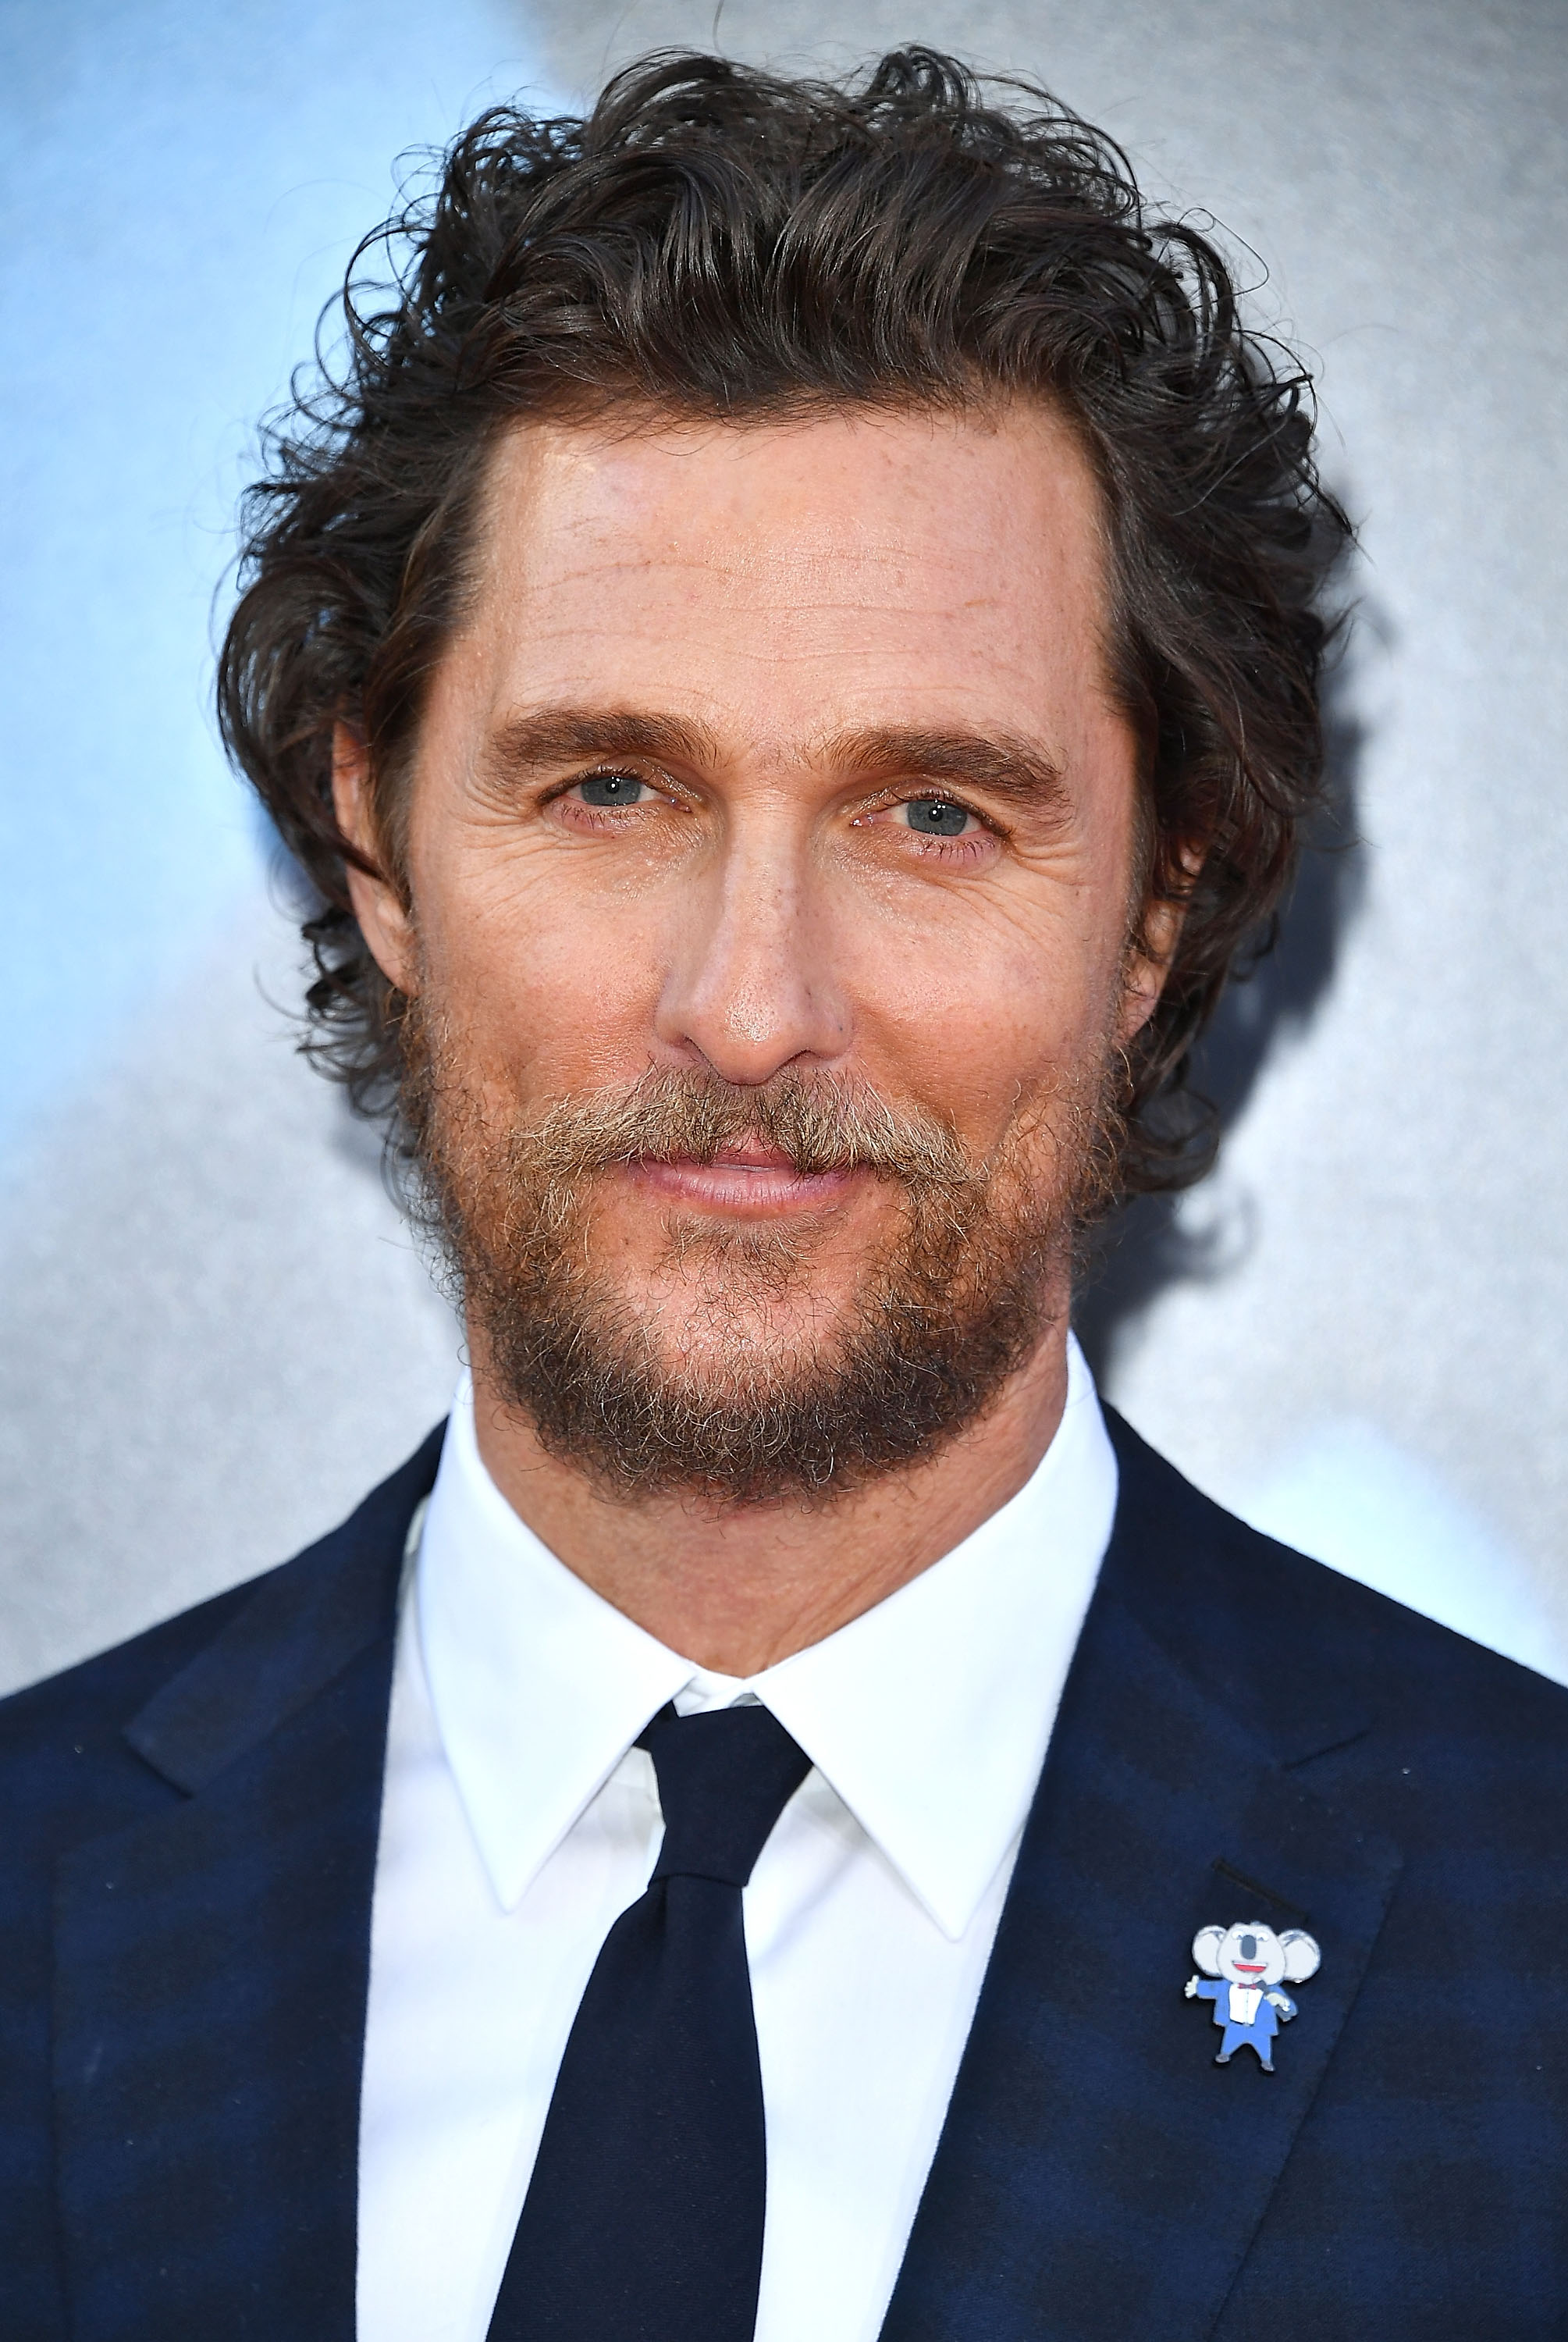 Matthew McConaughey arrives at the premiere of "Sing" on December 3, 2016 in Los Angeles, California.